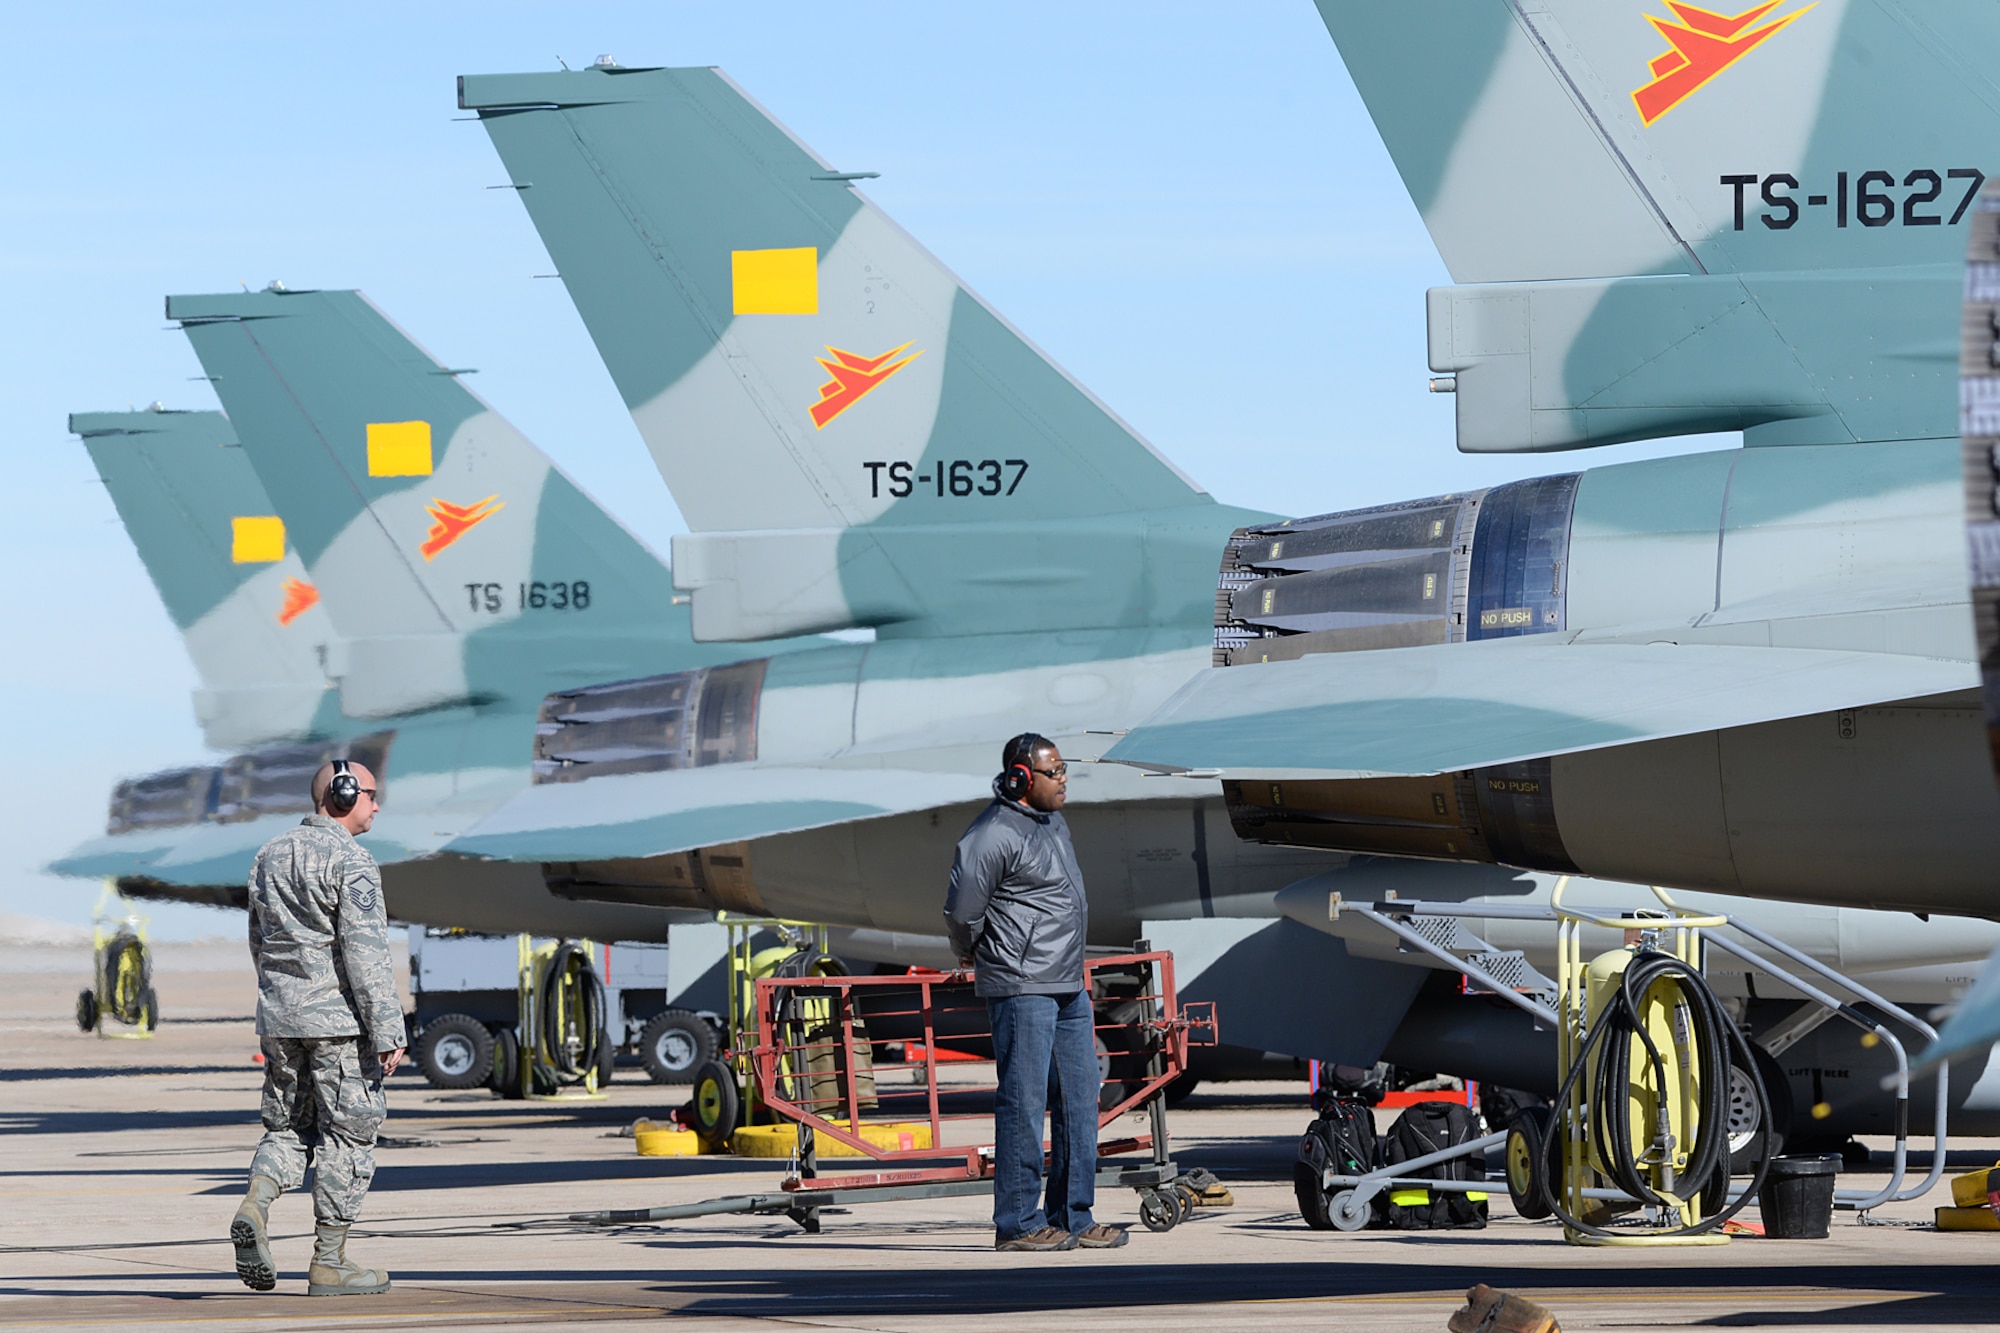 Ground crews walk around the Indonesian F-16 Fighting Falcon aircraft to ensure everthing is looking good prior to departure.  (U.S. Air Force Photo by Alex R. Lloyd)